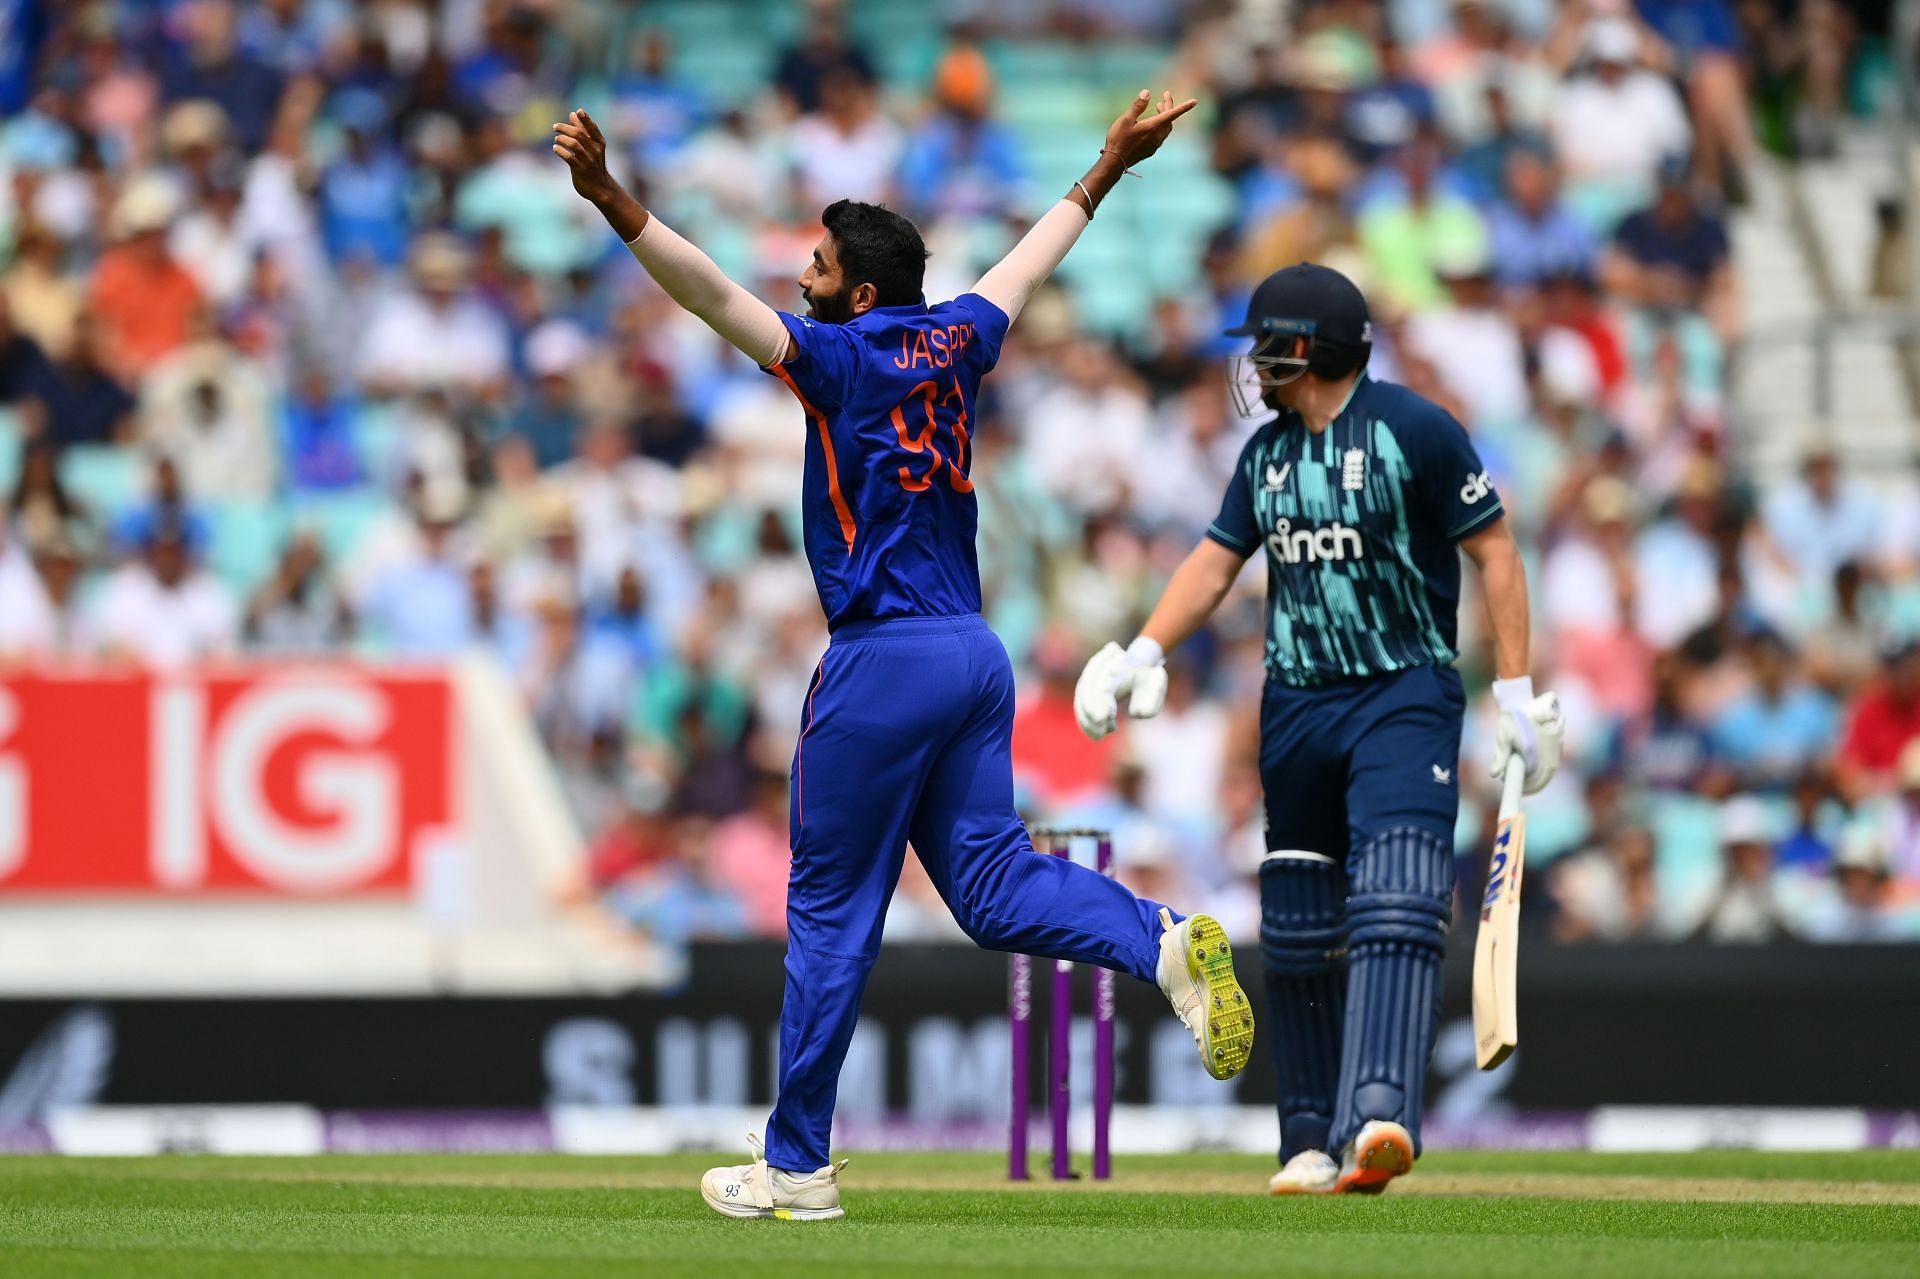 England v India - 1st Royal London Series One Day International (Image Courtesy: Getty Images)